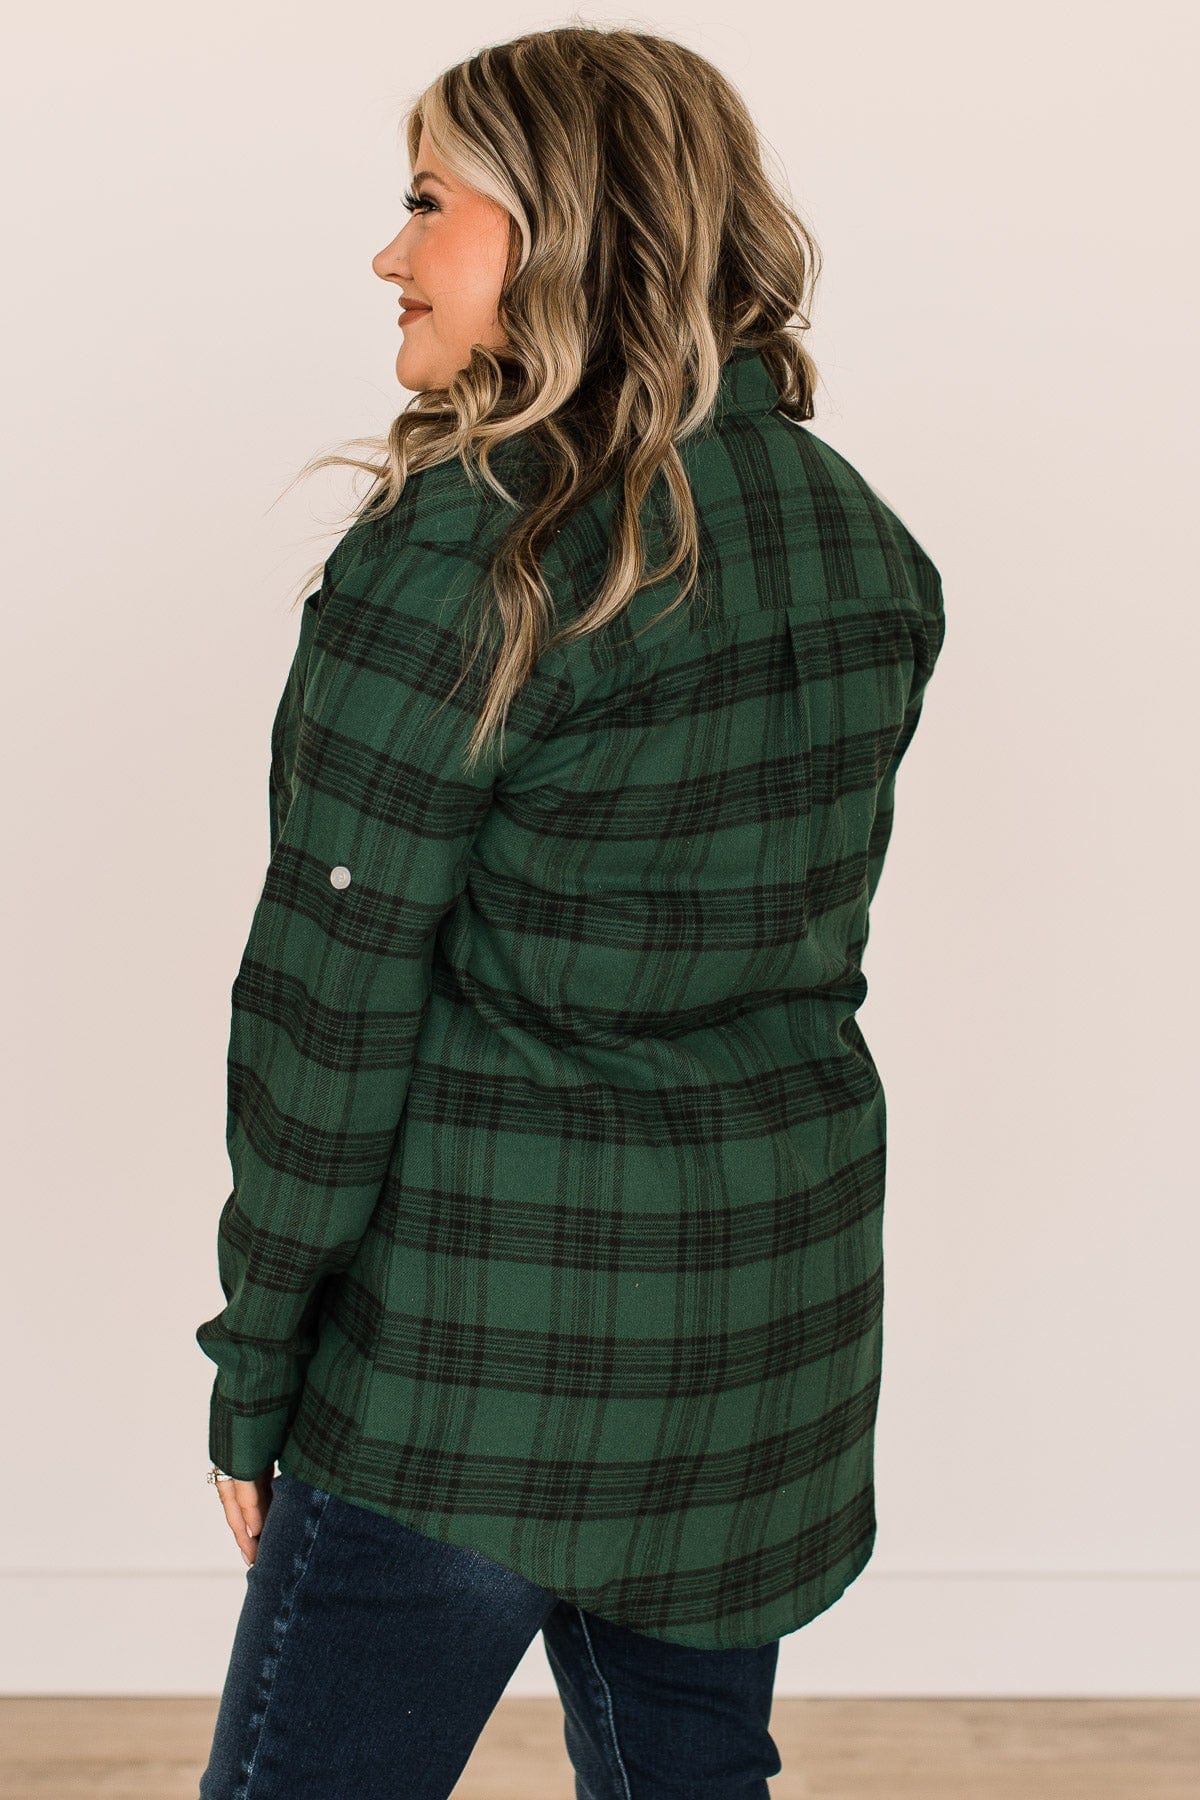 Never Gets Old Plaid Button Top- Hunter Green